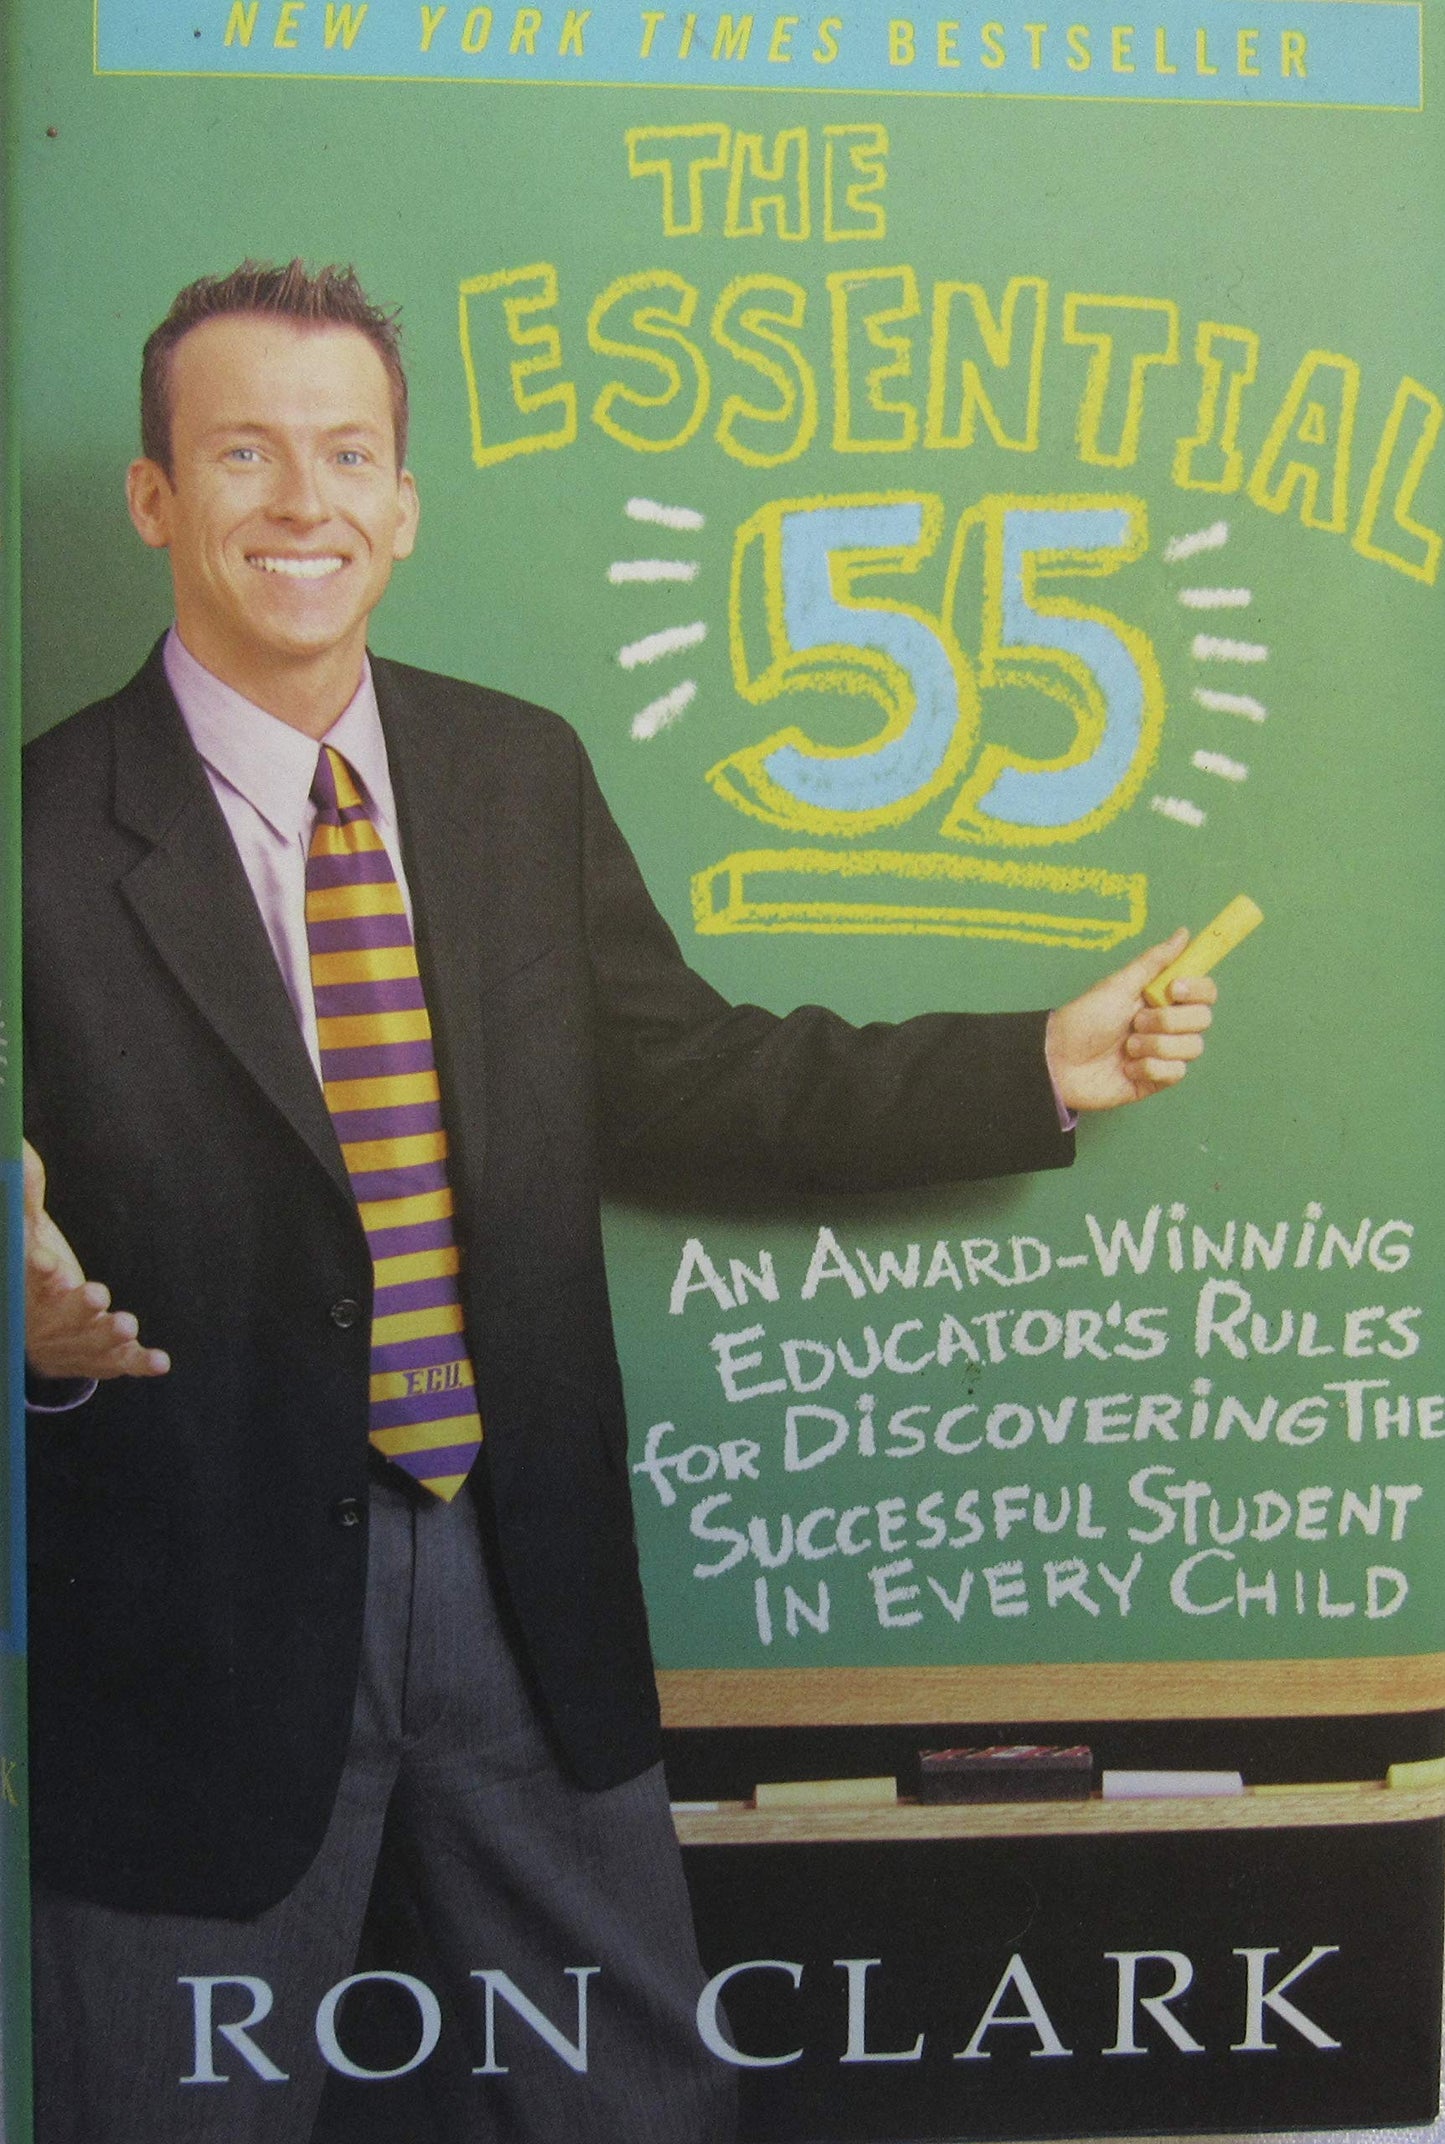 Essential 55: An Award-Winning Educator's Rules for Discovering the Successful Student in Every Child